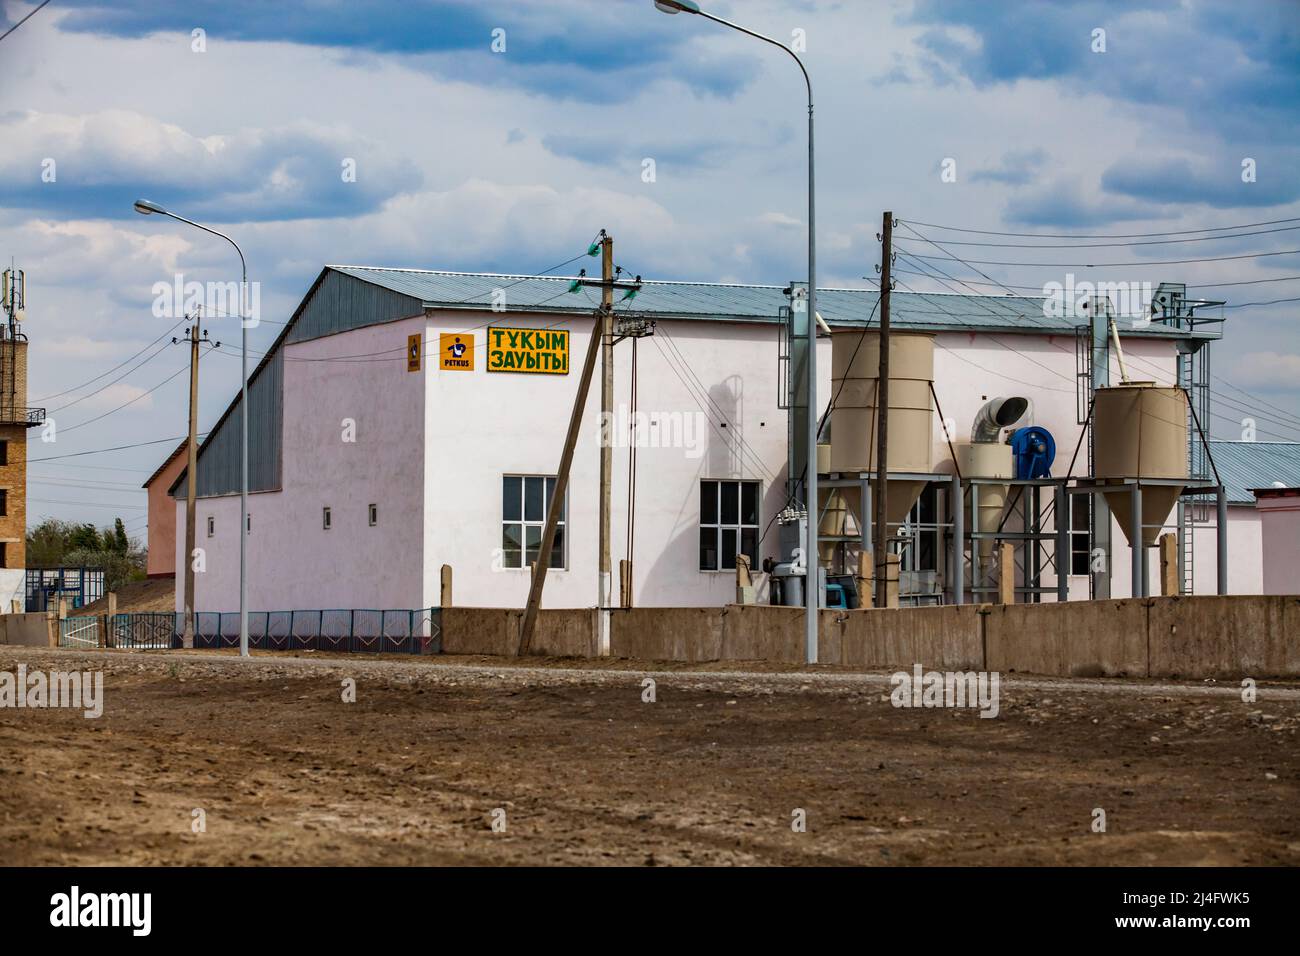 Kyzylorda Province, Kazakhstan - May 01, 2019. Rice processing plant. Main building and loading hoppers. Blue sky, clouds. Stock Photo